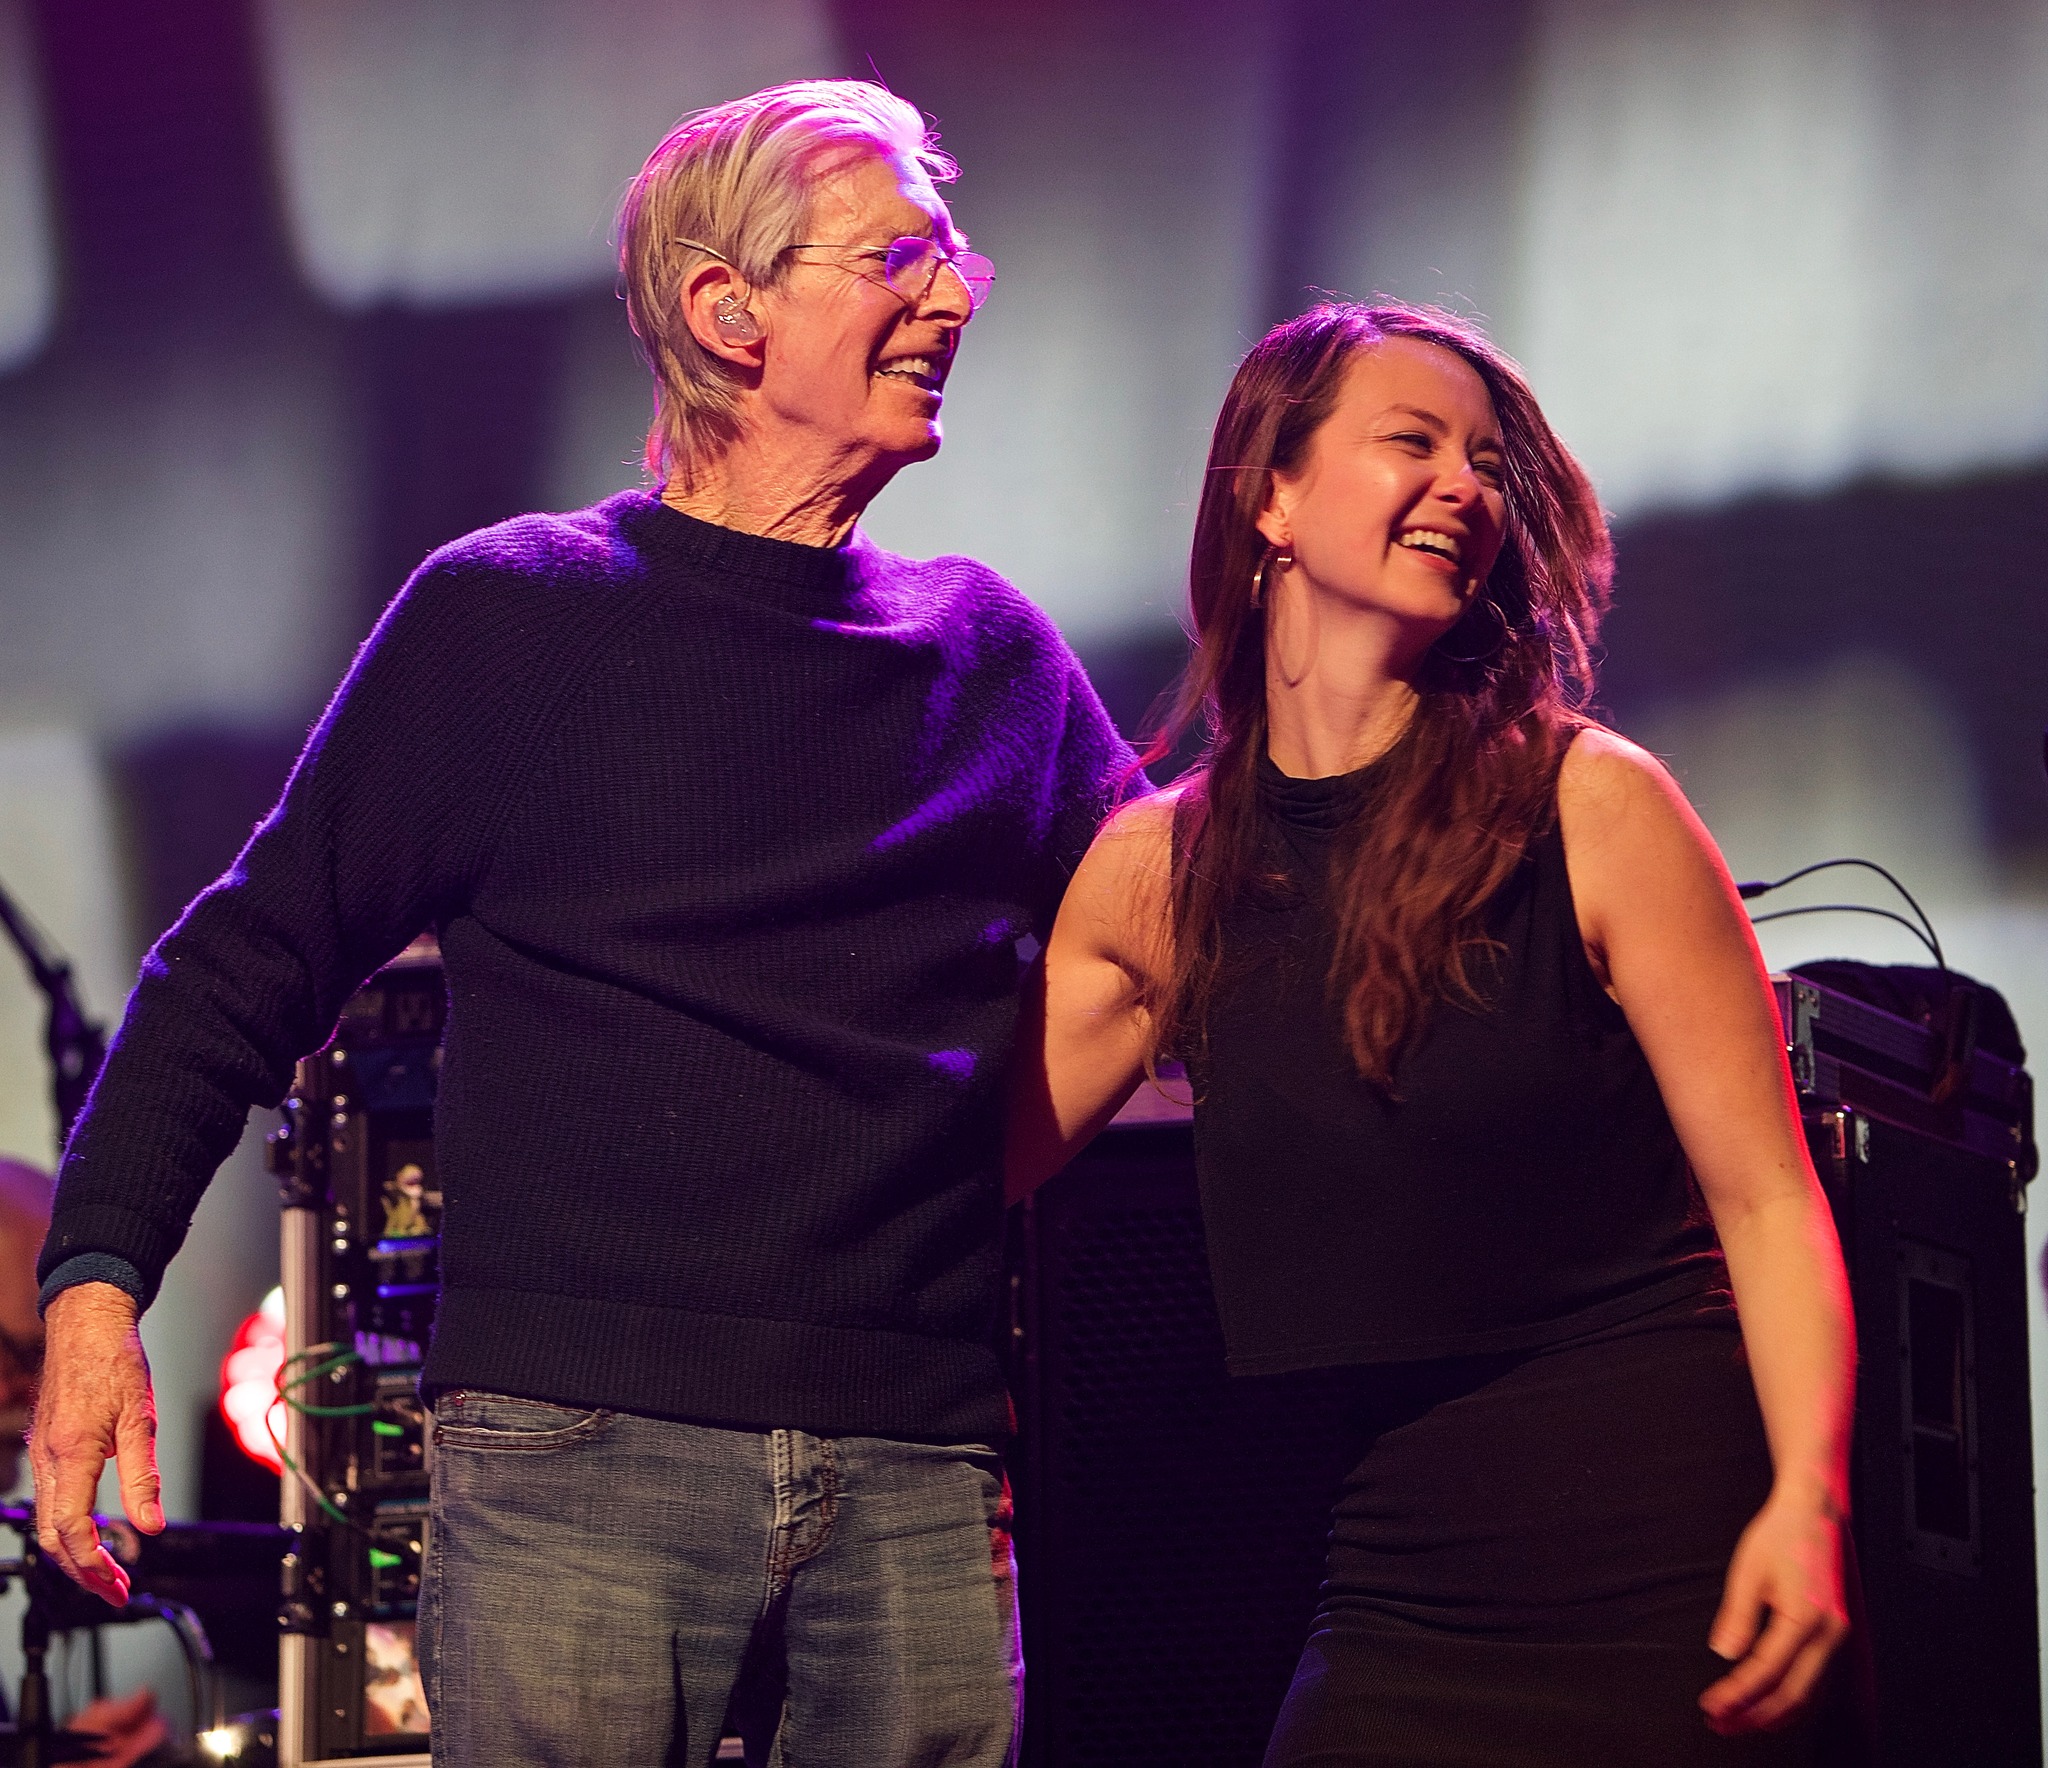 Phil Lesh & Natalie Cressman all smiles at the end of a great show